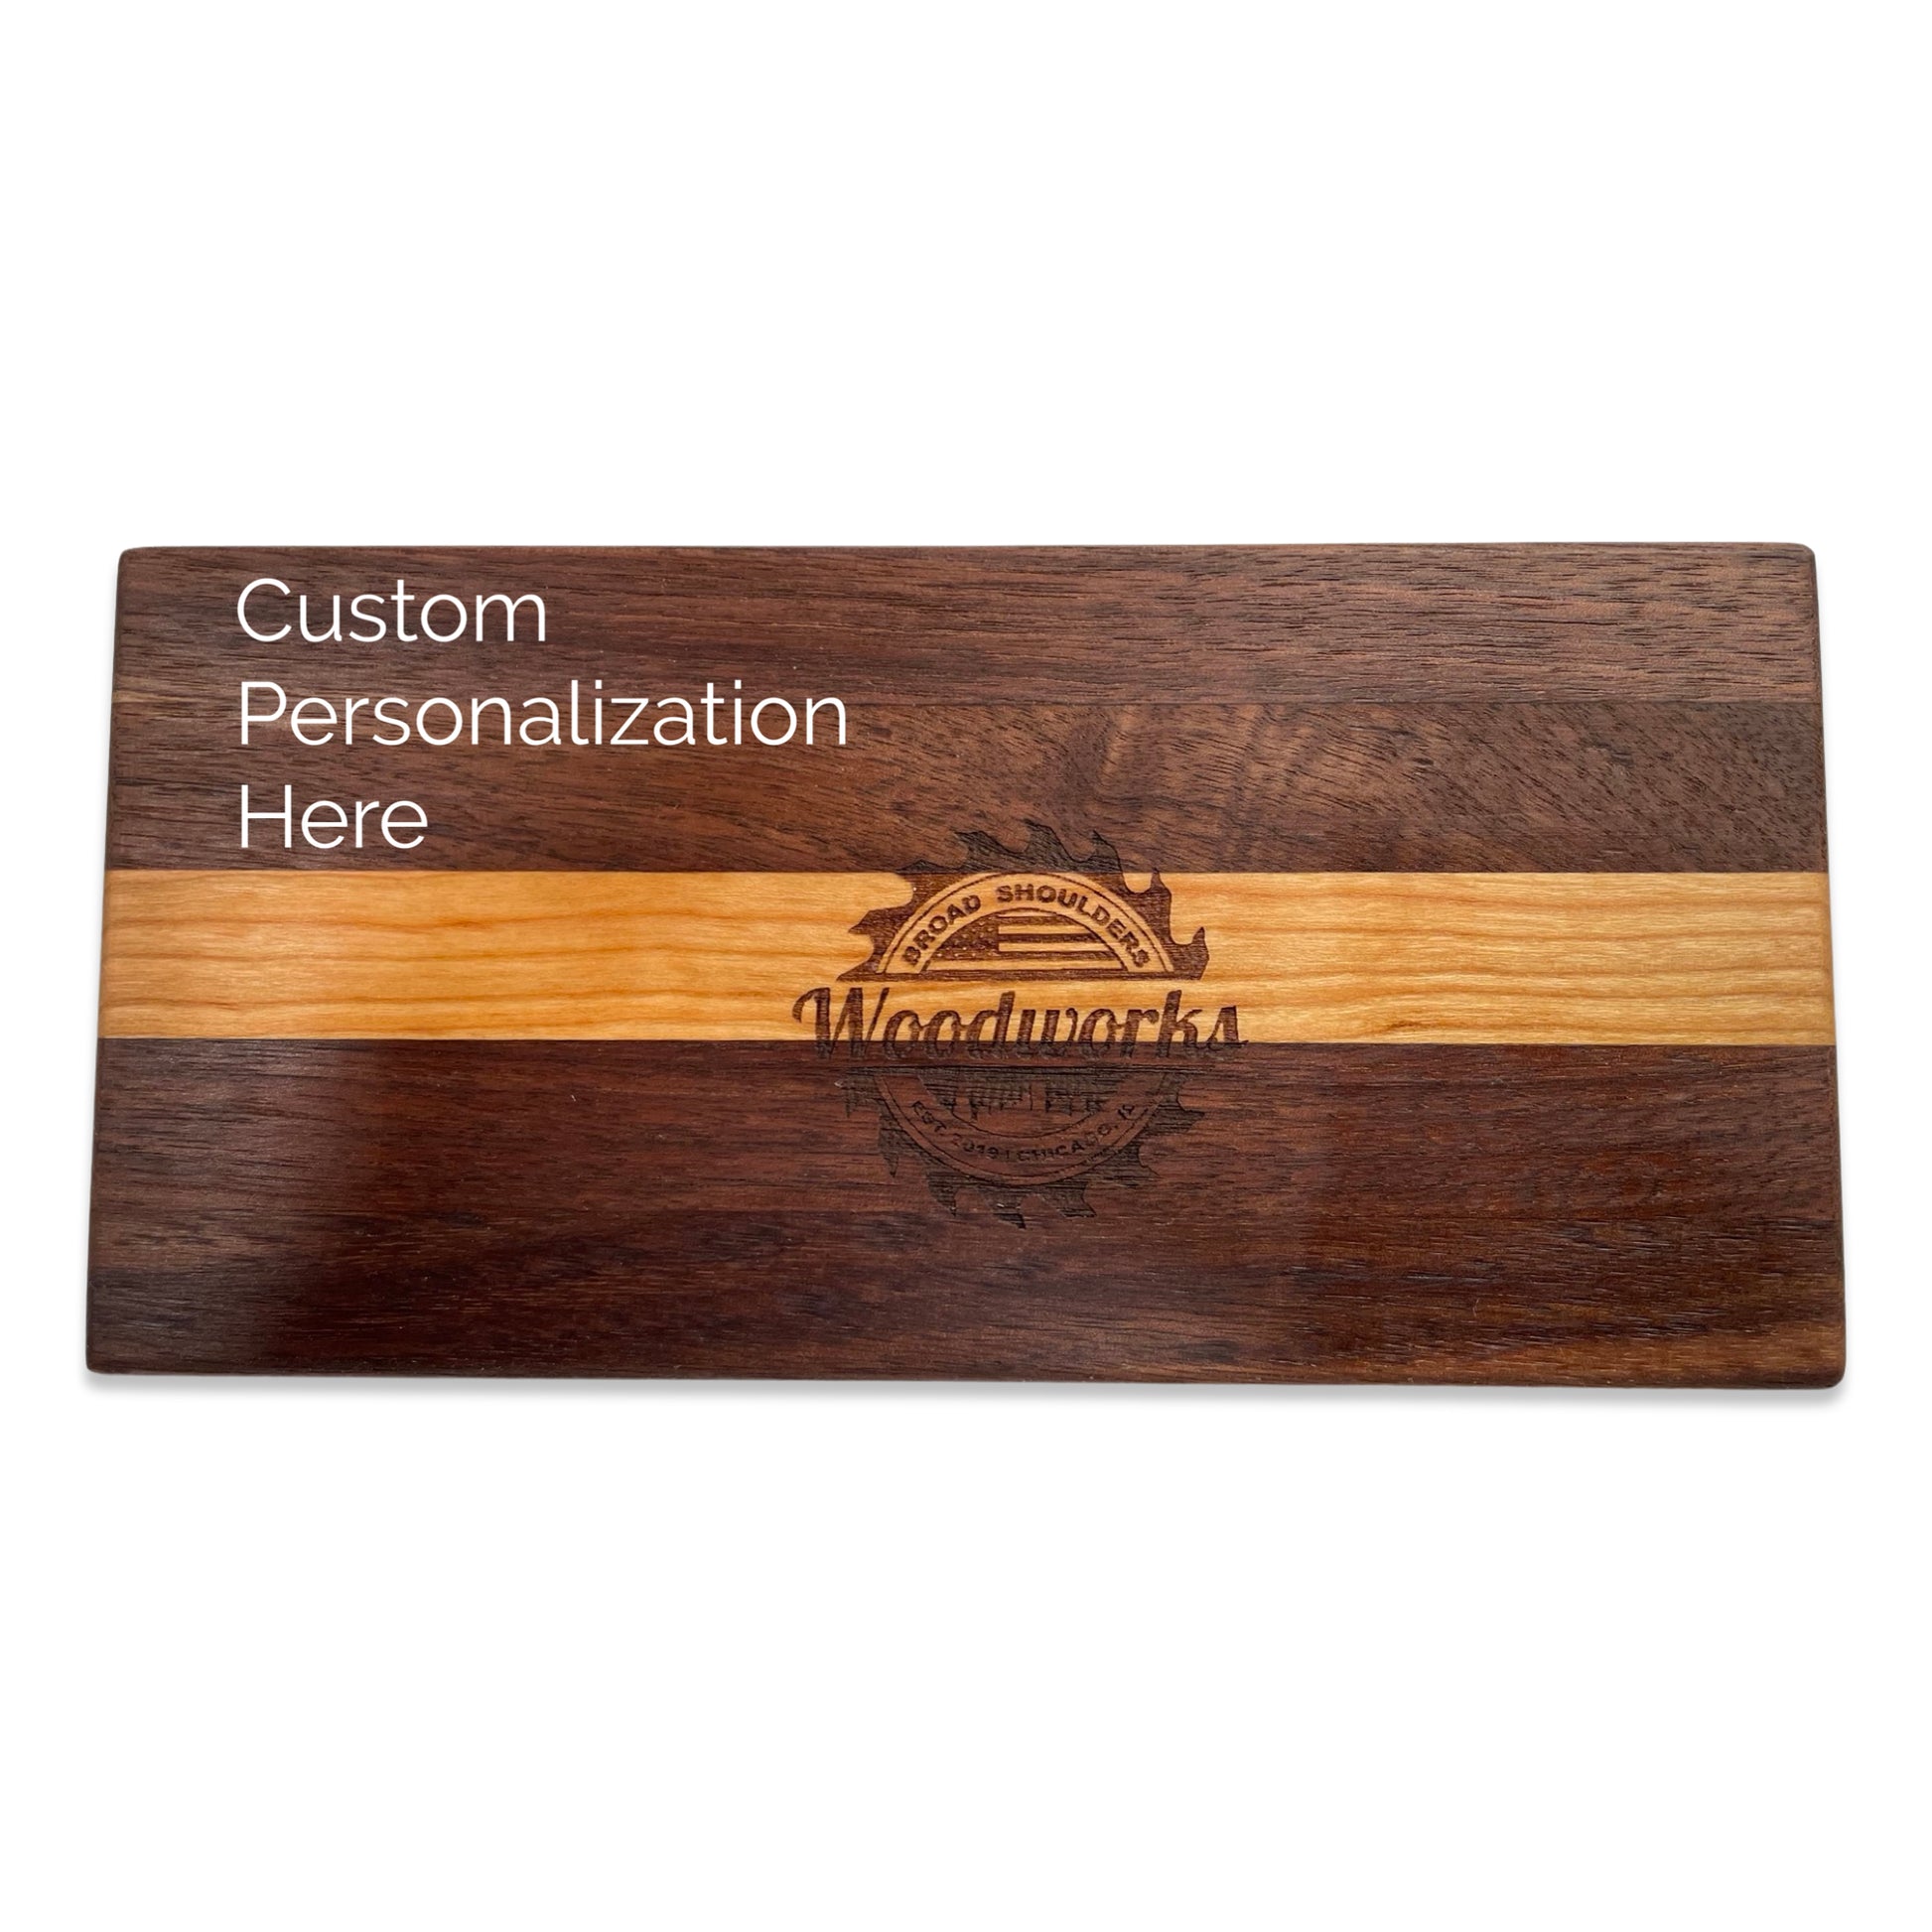 Custom Personalization Available